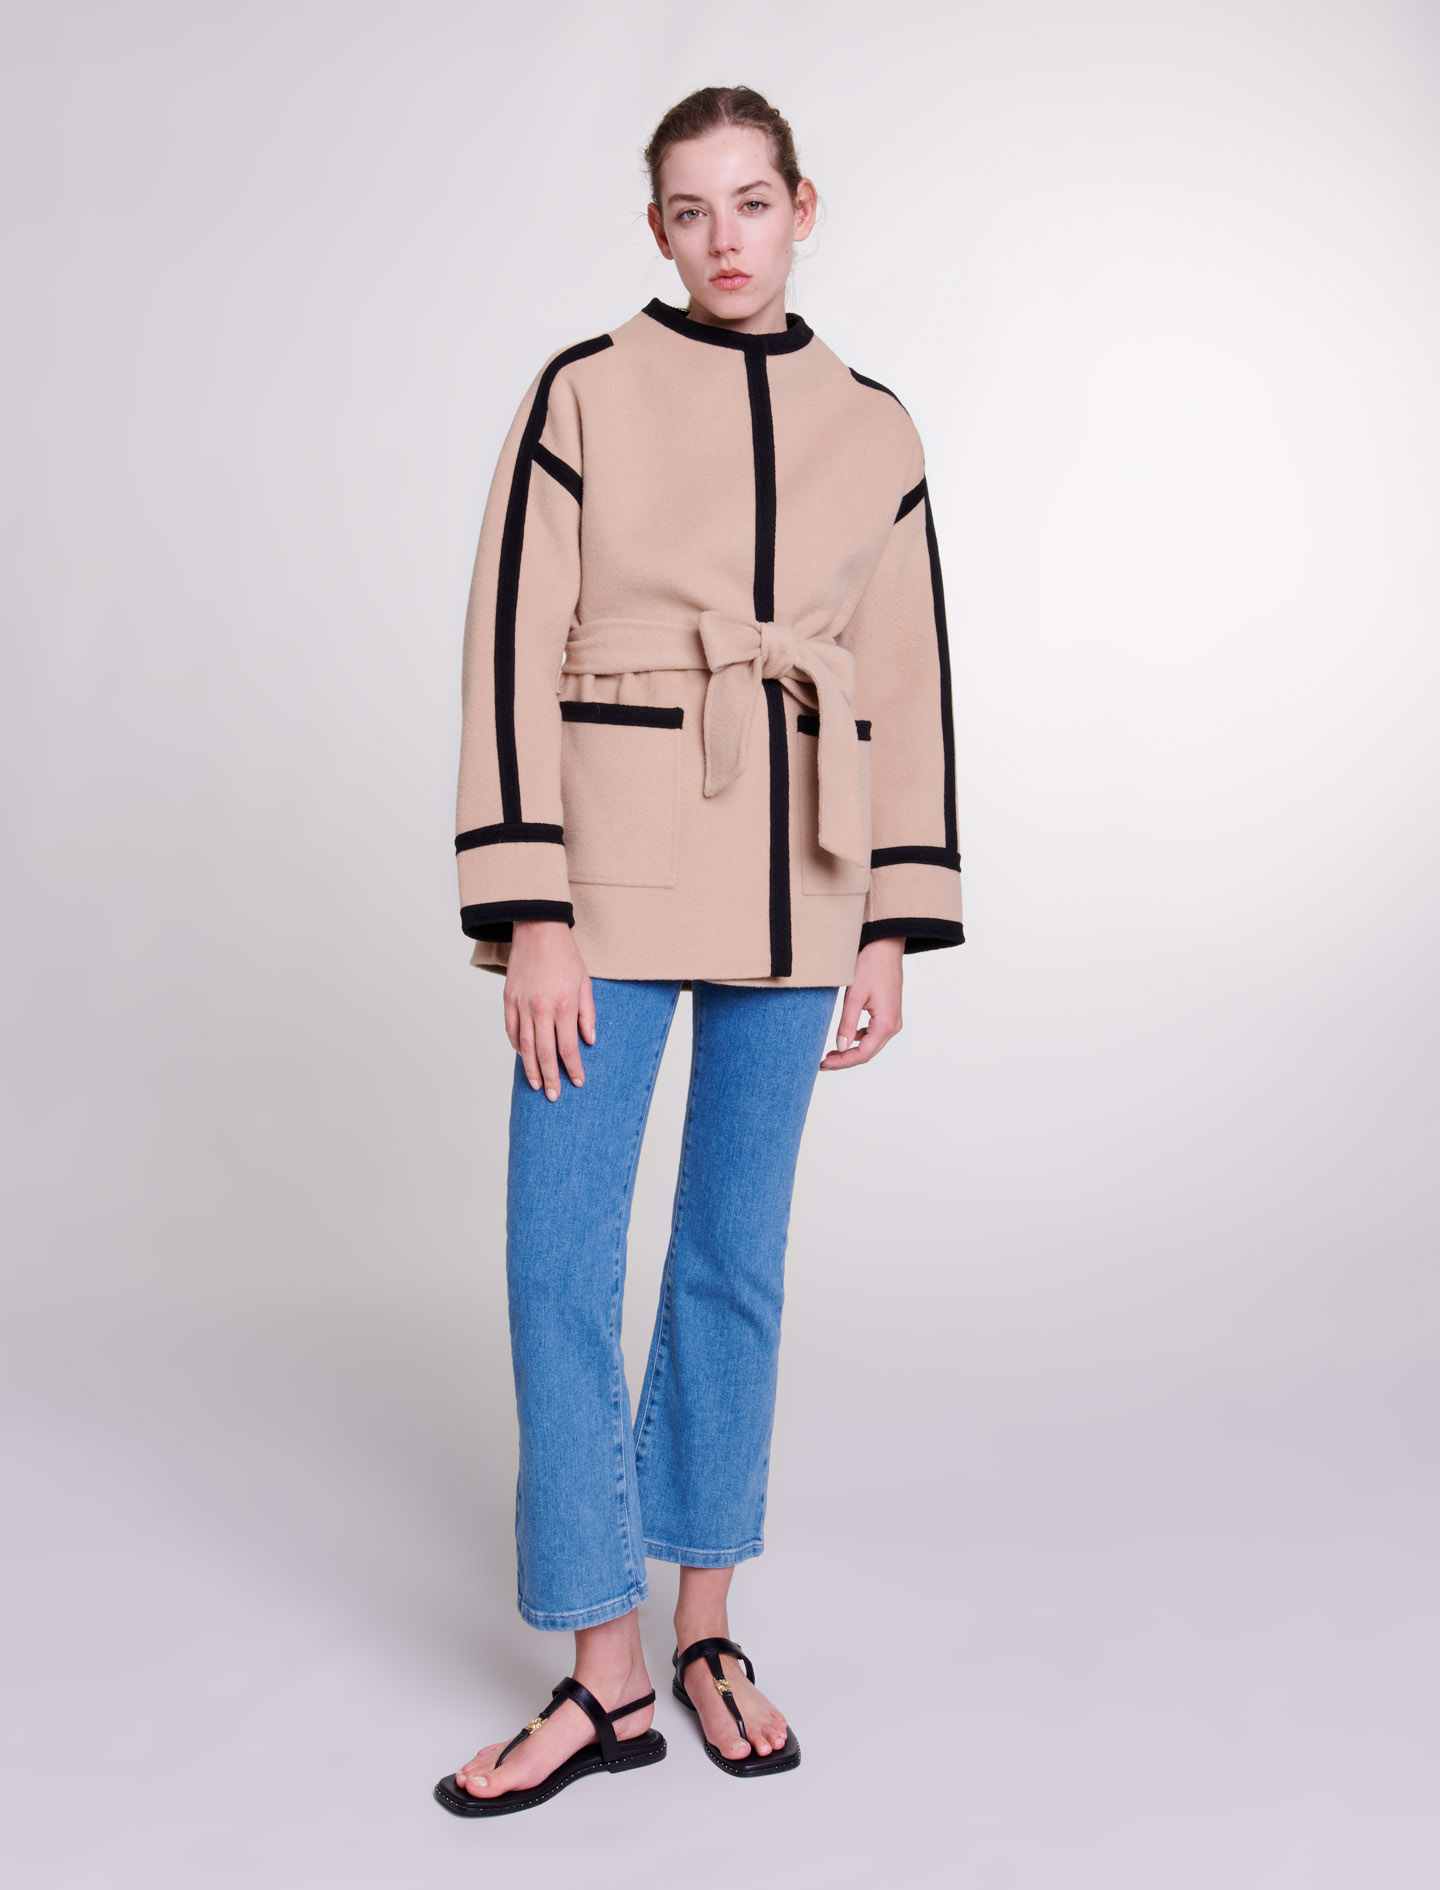 Maje Woman's wool, Short two-tone coat for Fall/Winter, in color Camel / Brown